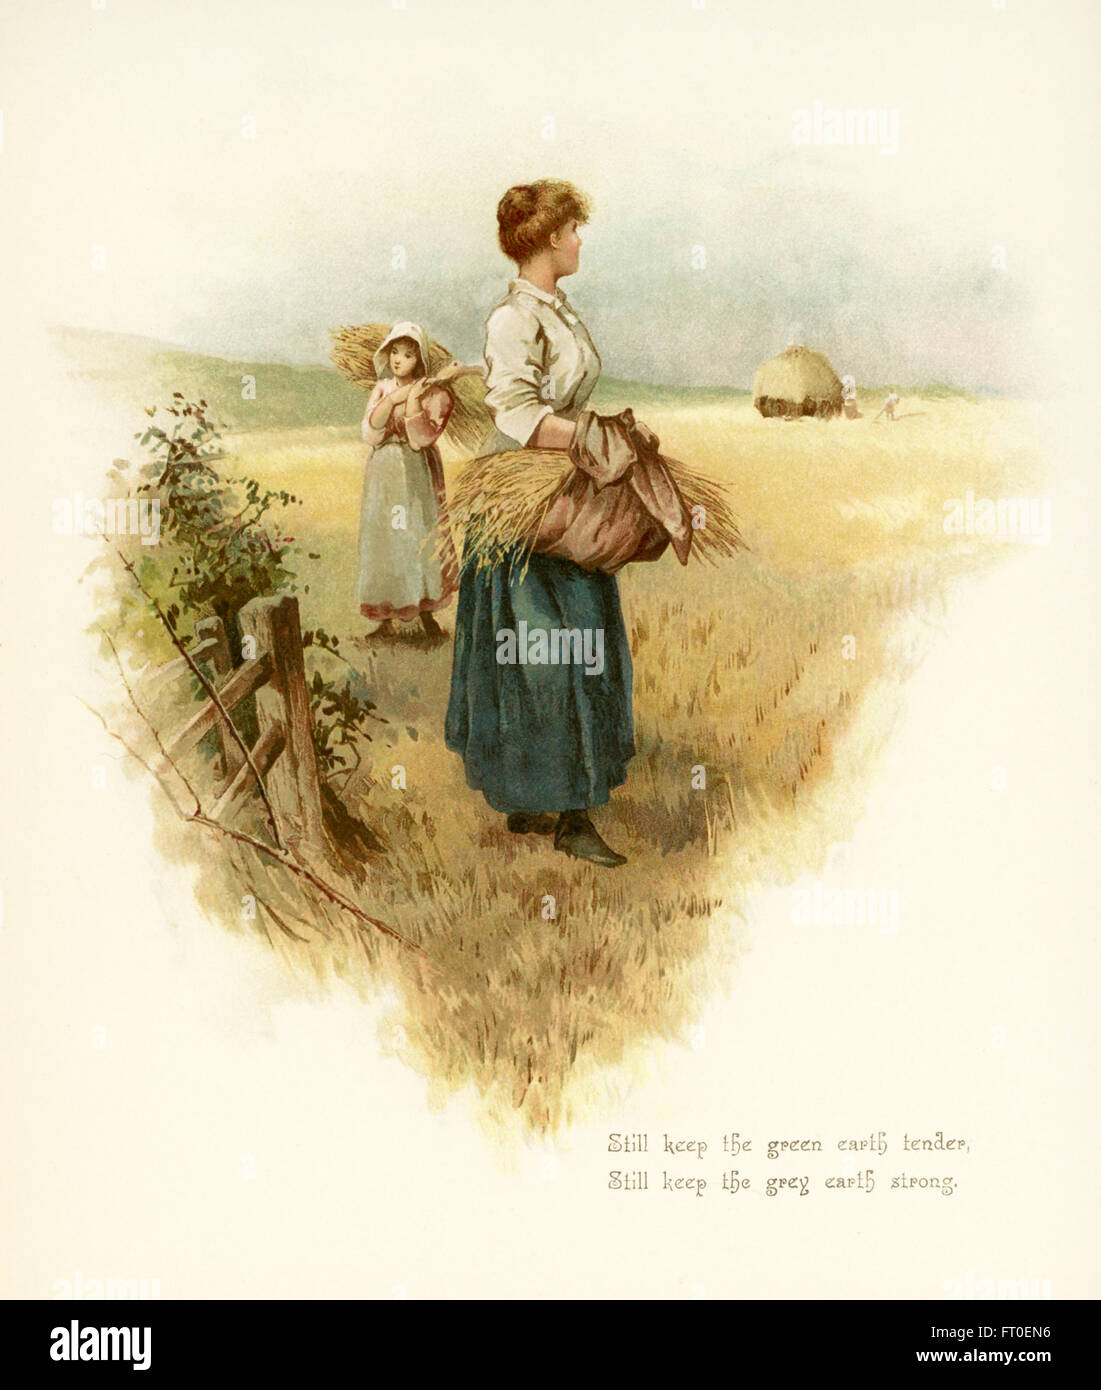 The caption for this illustration reads: Still keep the green earth tender, still keep the grey earth strong. Here two women are working in the hay fields. The scene is fall and harvest time. It  accompanied Phillips Brooks’s Poems.  Brooks was an Episcopalian minister in Boston in the late 1800s. Stock Photo